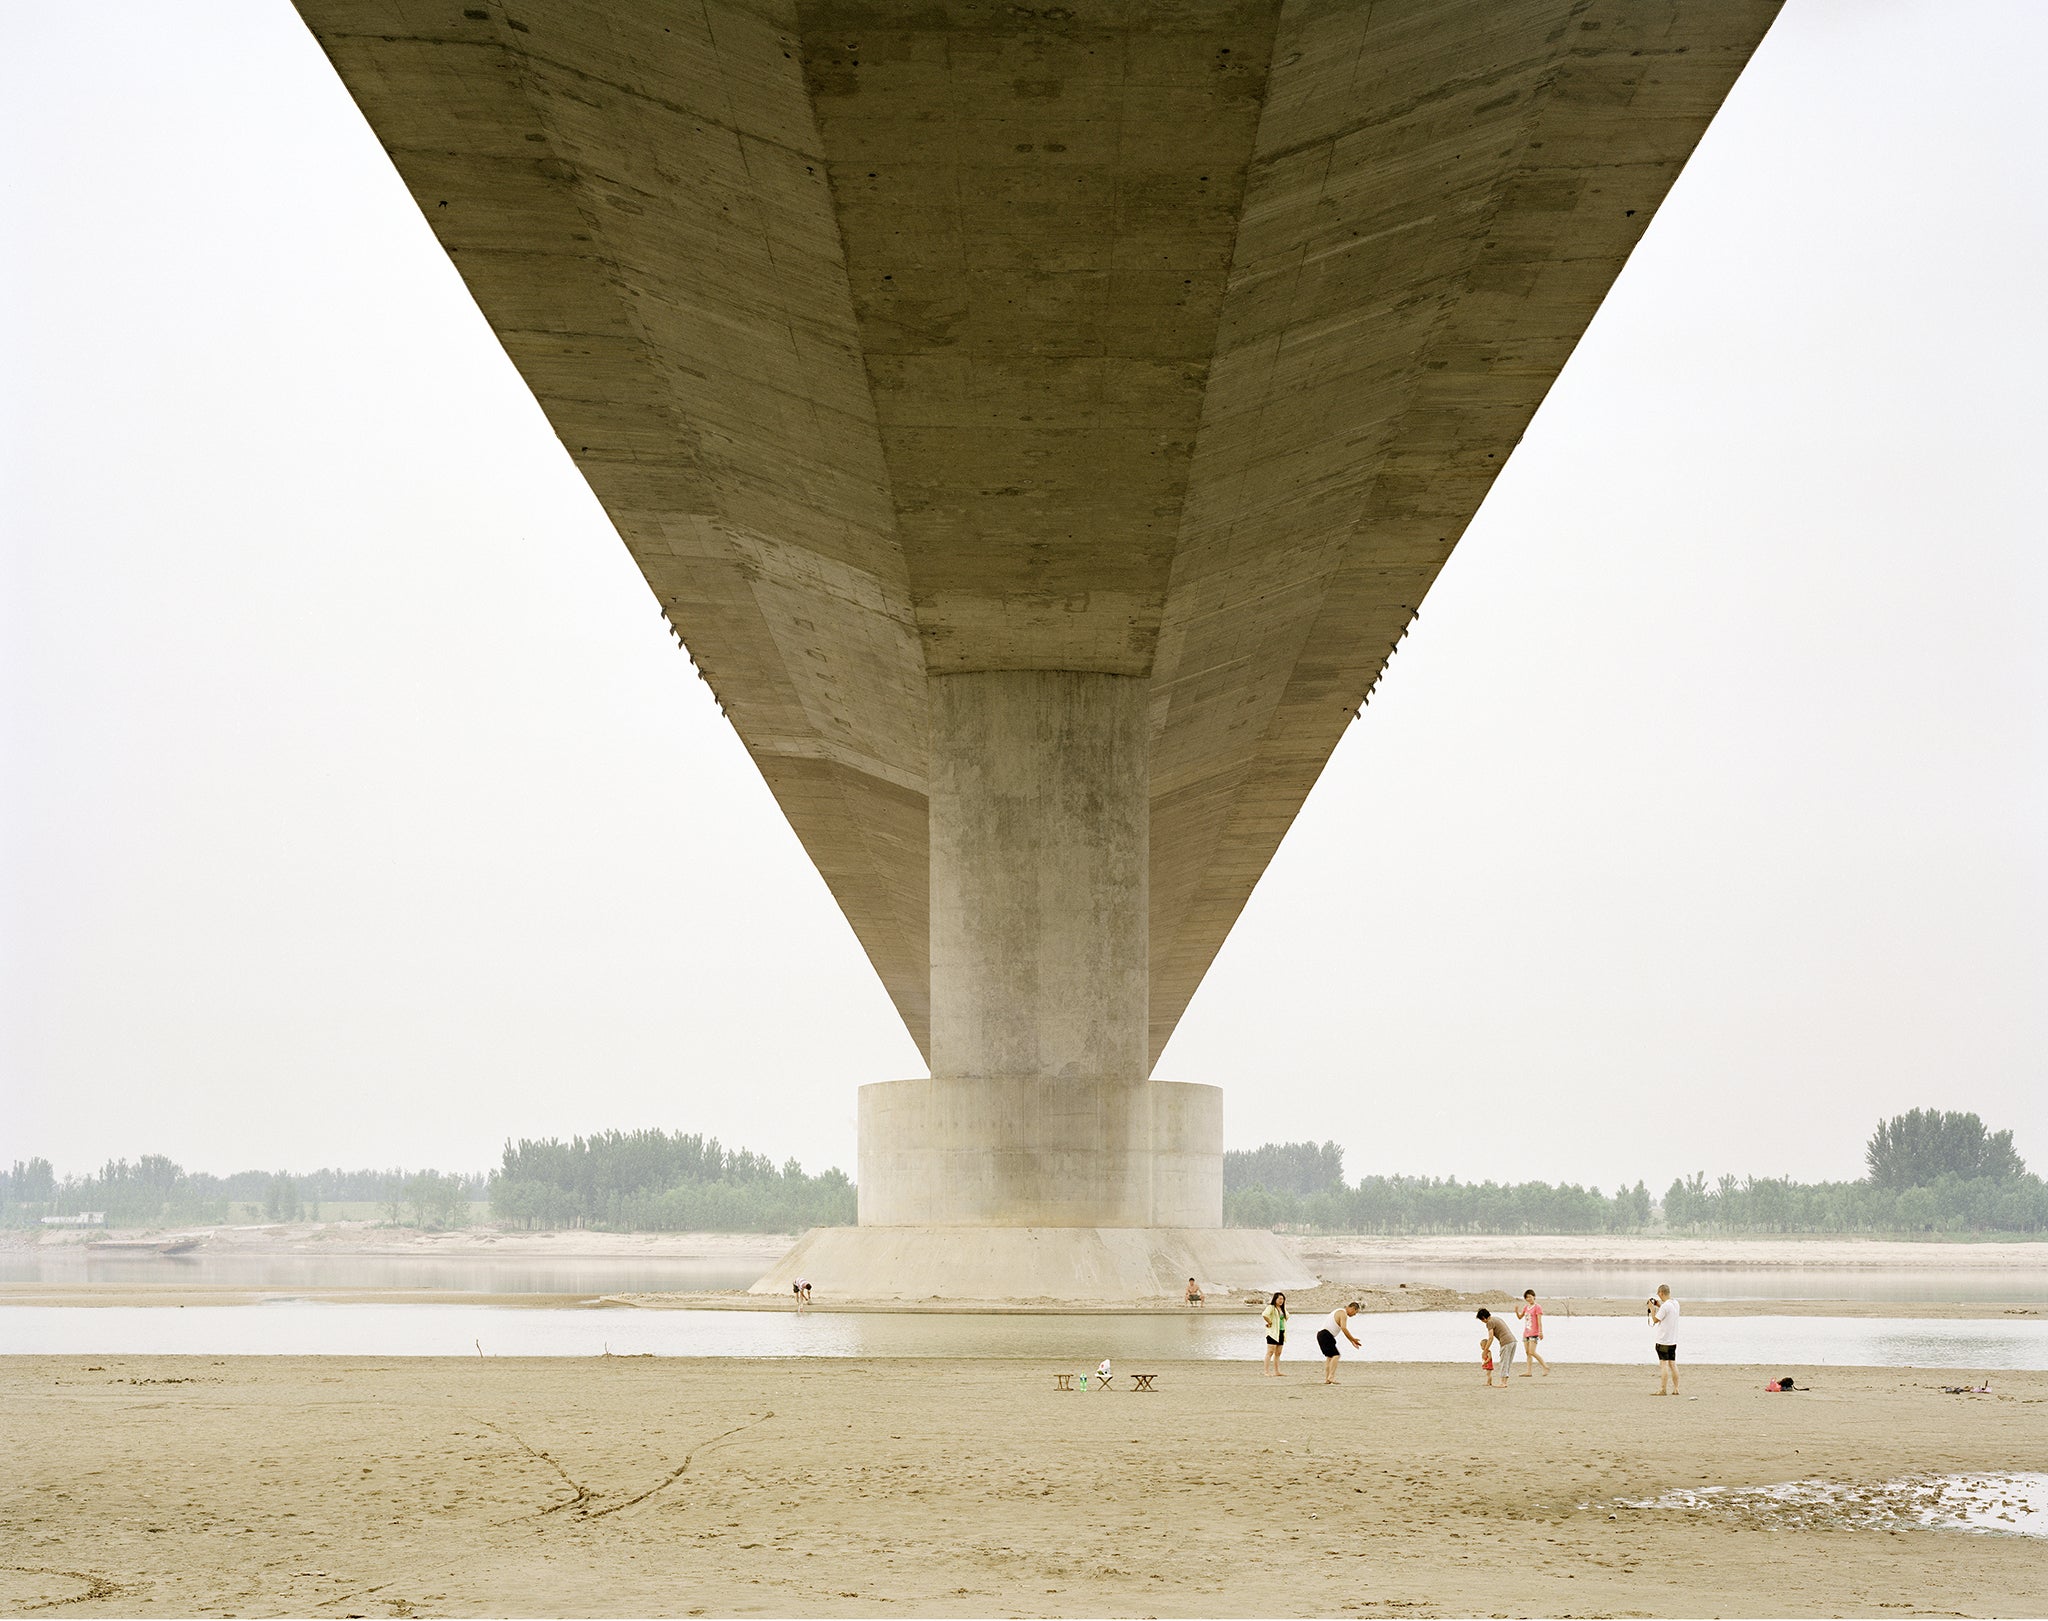 A Family Spending the Weekend Under a Bridge, 2011 by Zhang Kechun